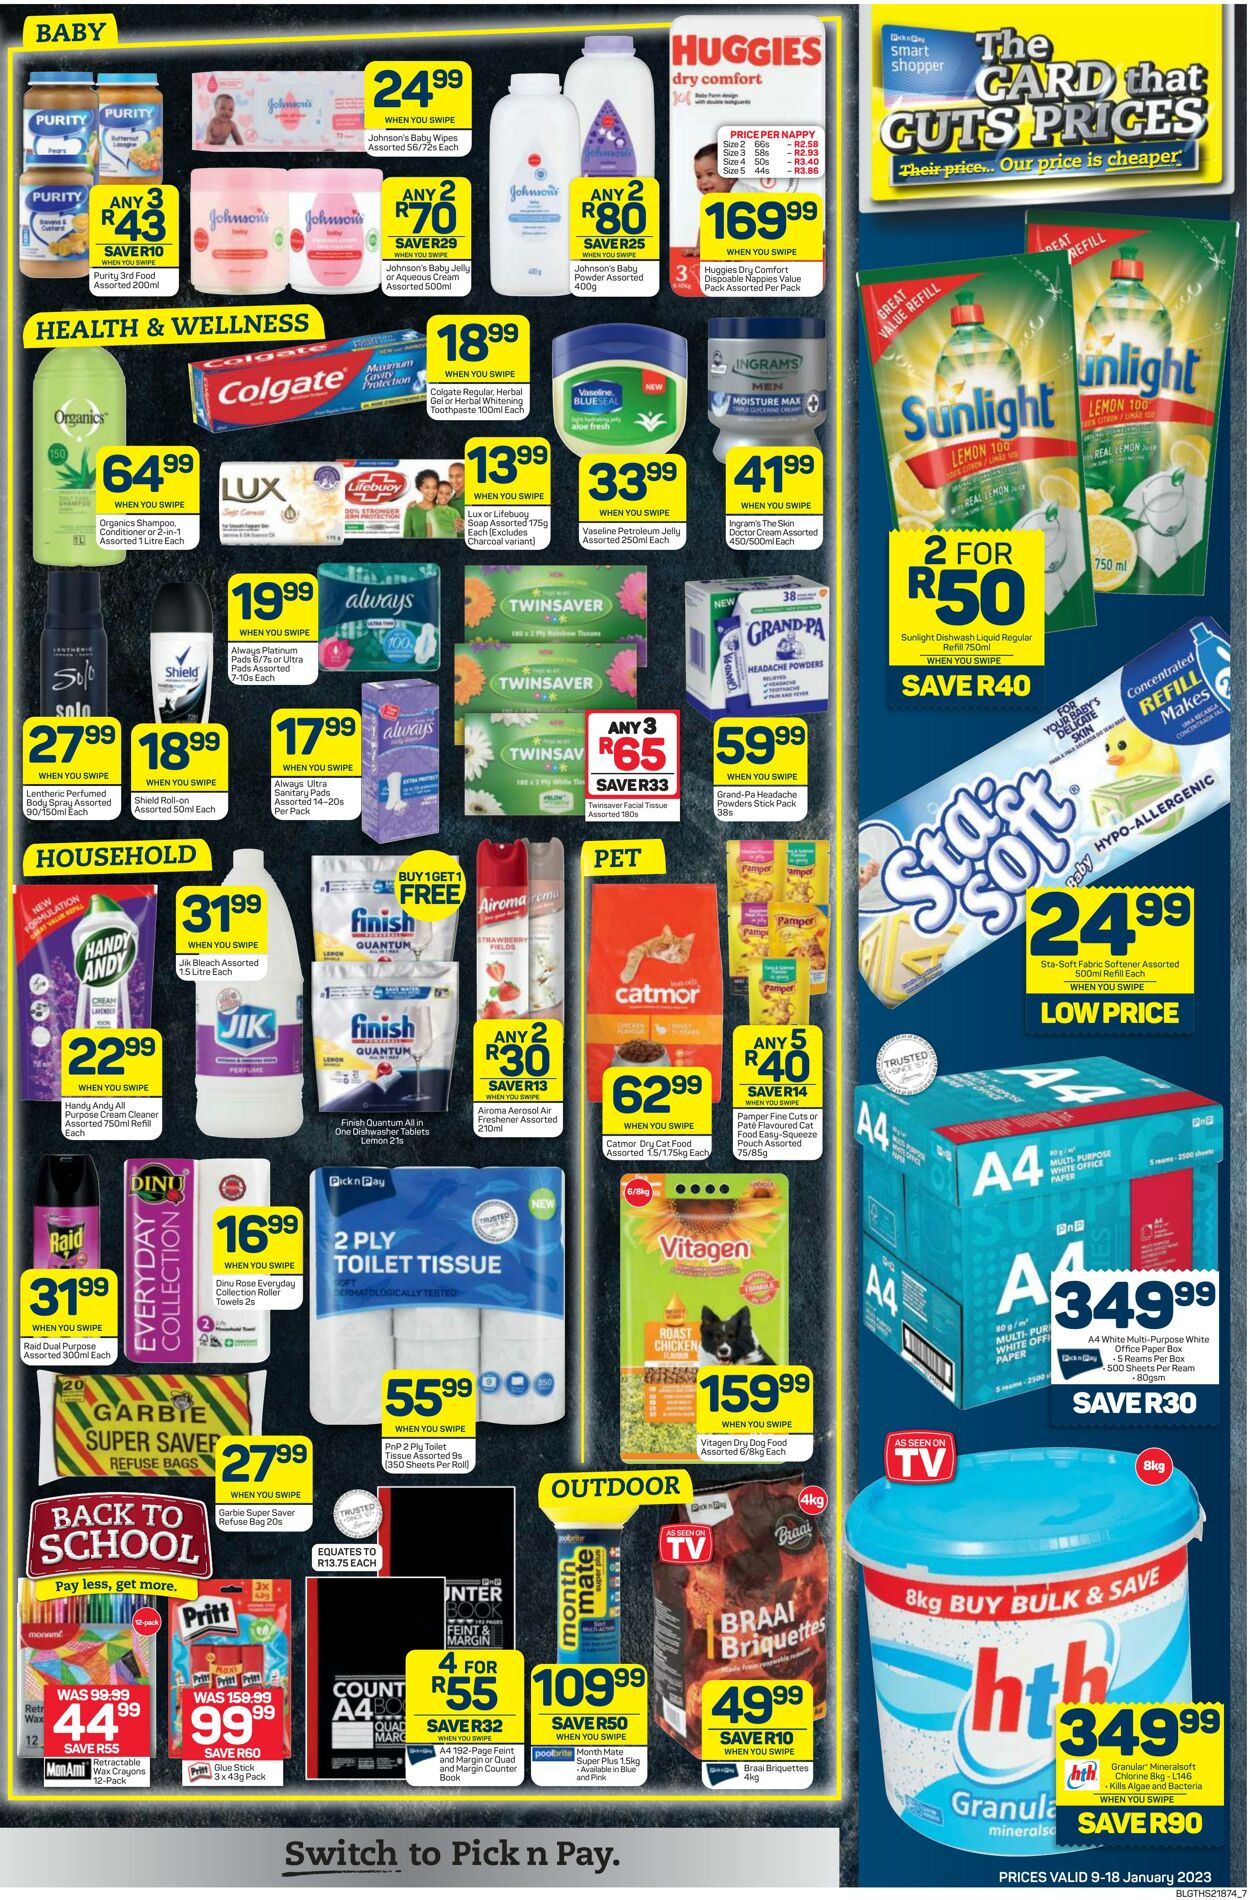 Special Pick n Pay 09.01.2023 - 18.01.2023